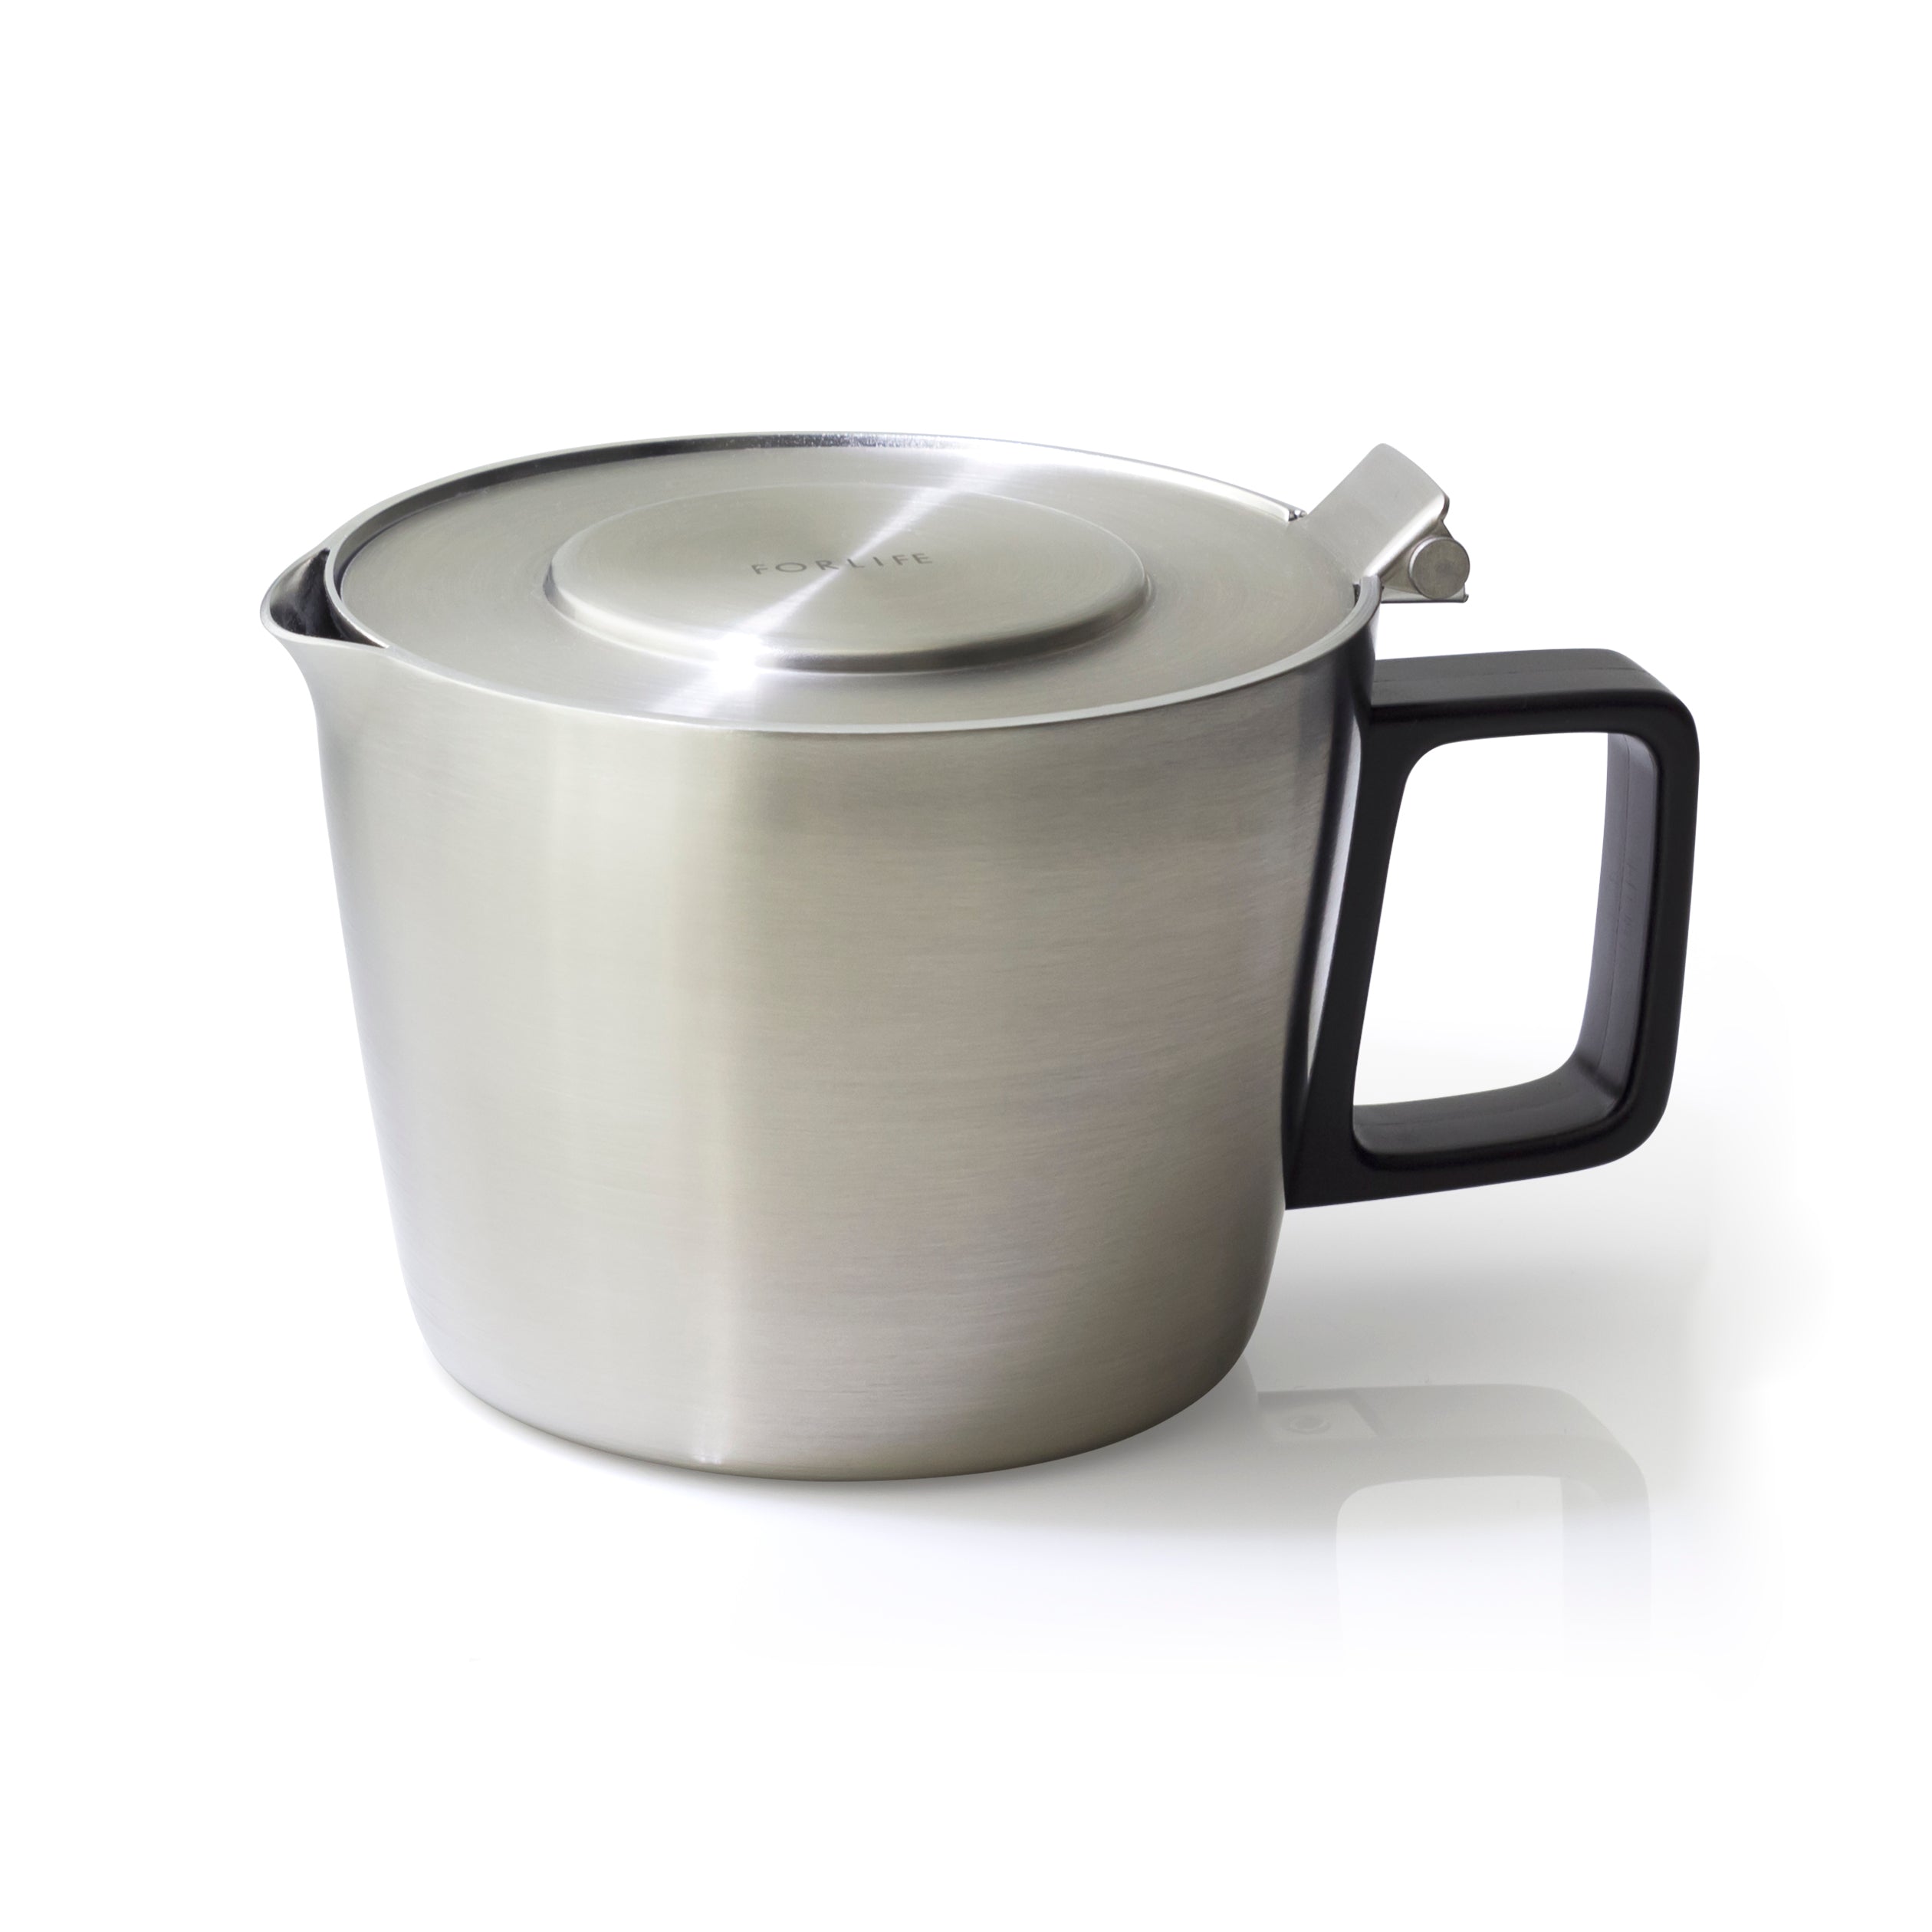 Hospitality Stainless Steel Teapot with Built in Strainer 14 oz.